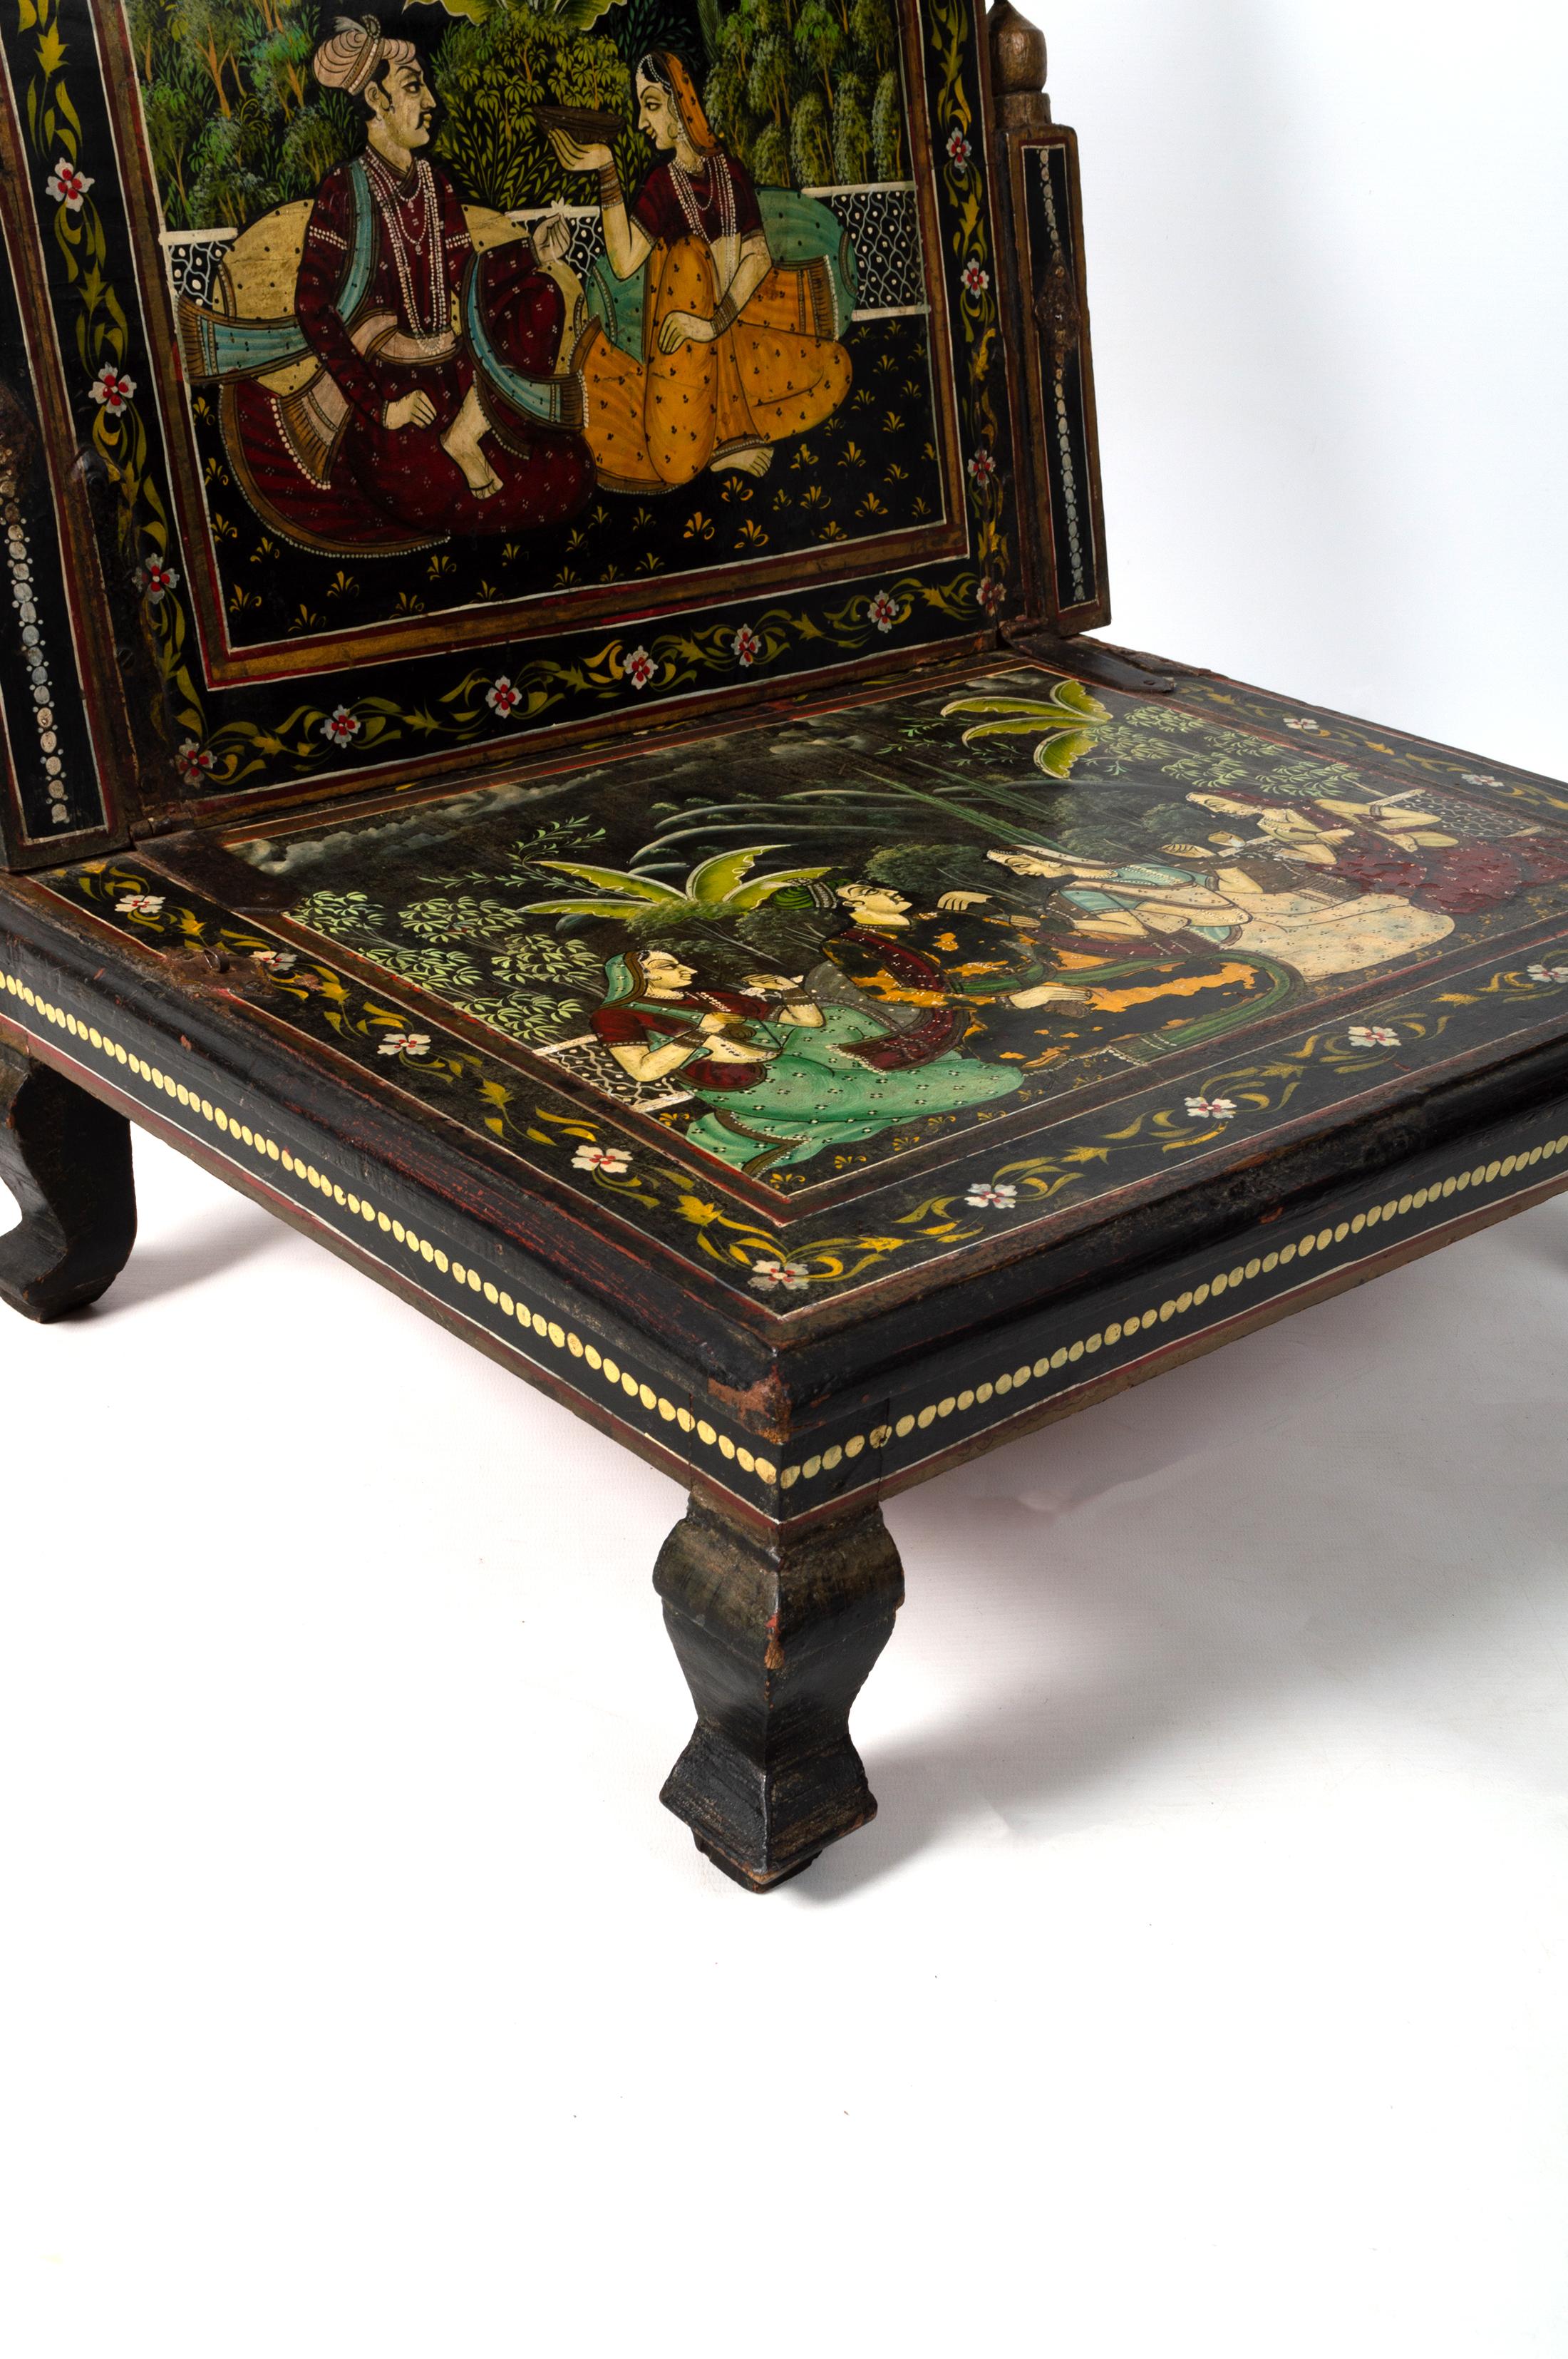 Antique Anglo-Indian Rajasthani Painted Mughal Scene Folding Chair For Sale 2